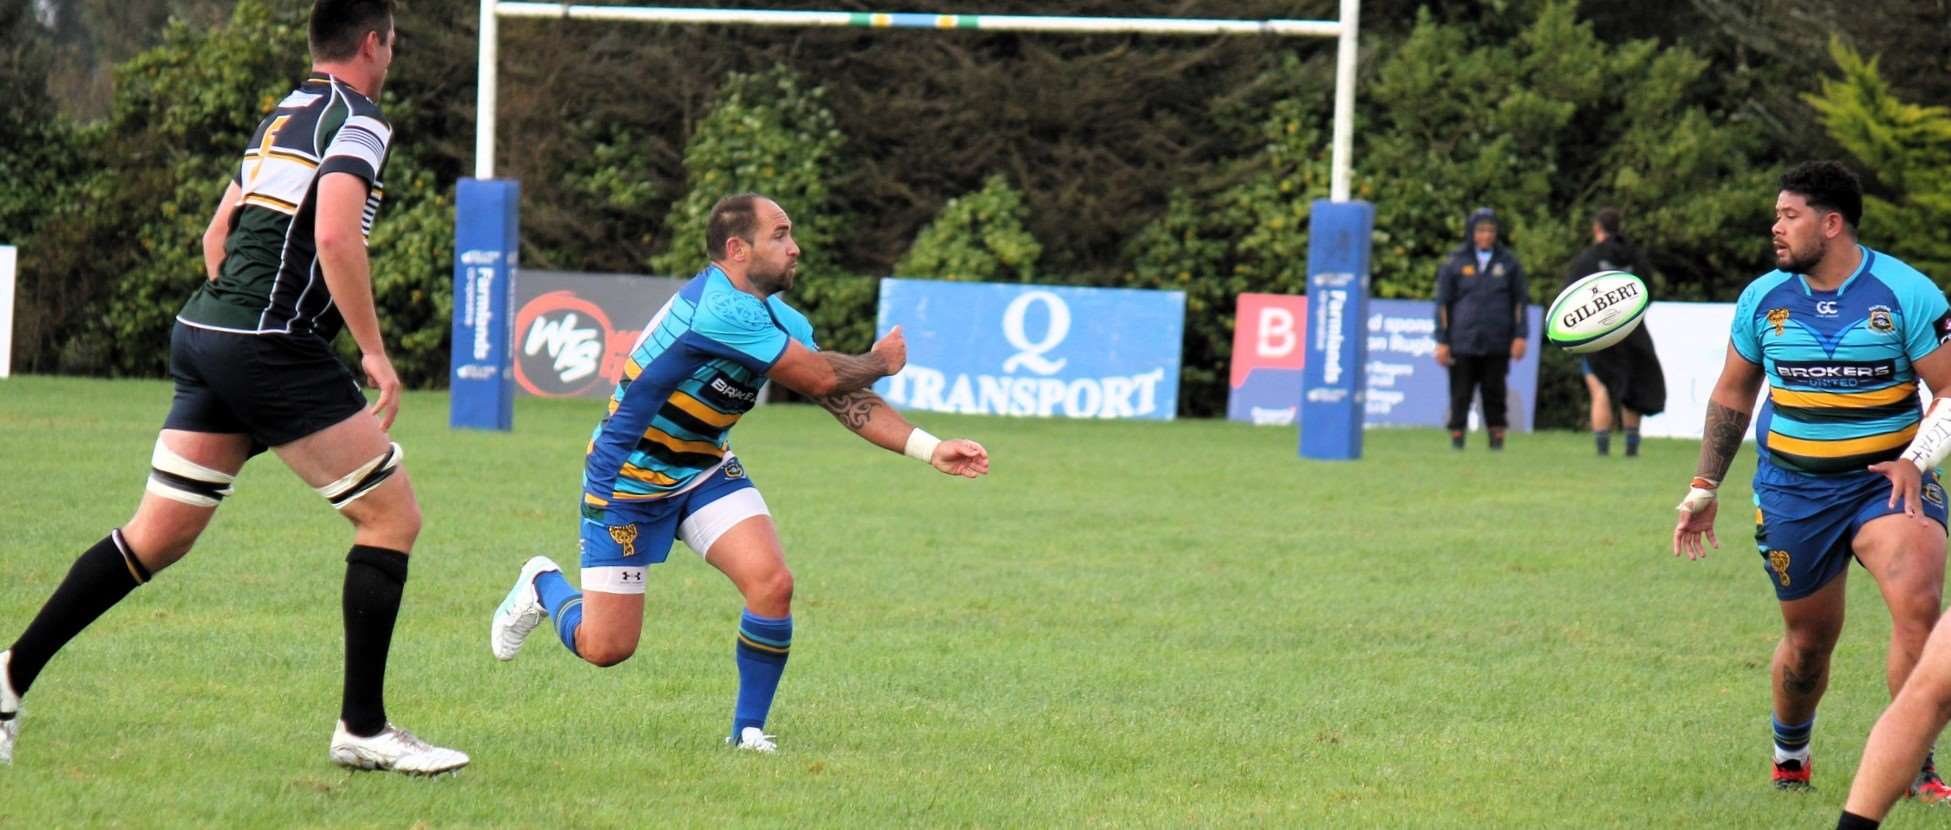 Rugby: Experienced pivot back for Clifton